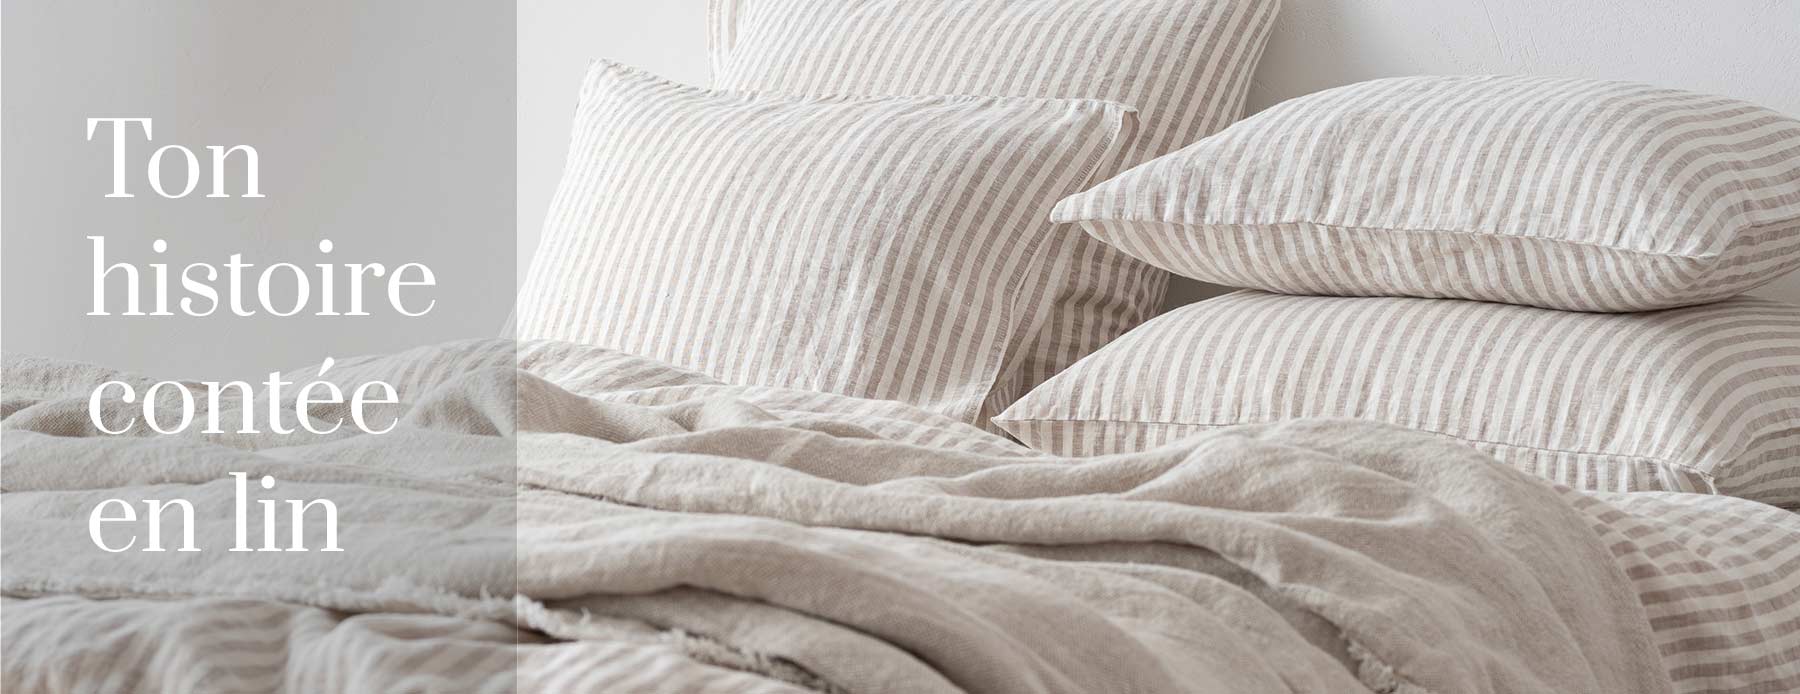 LinenMe bed linen